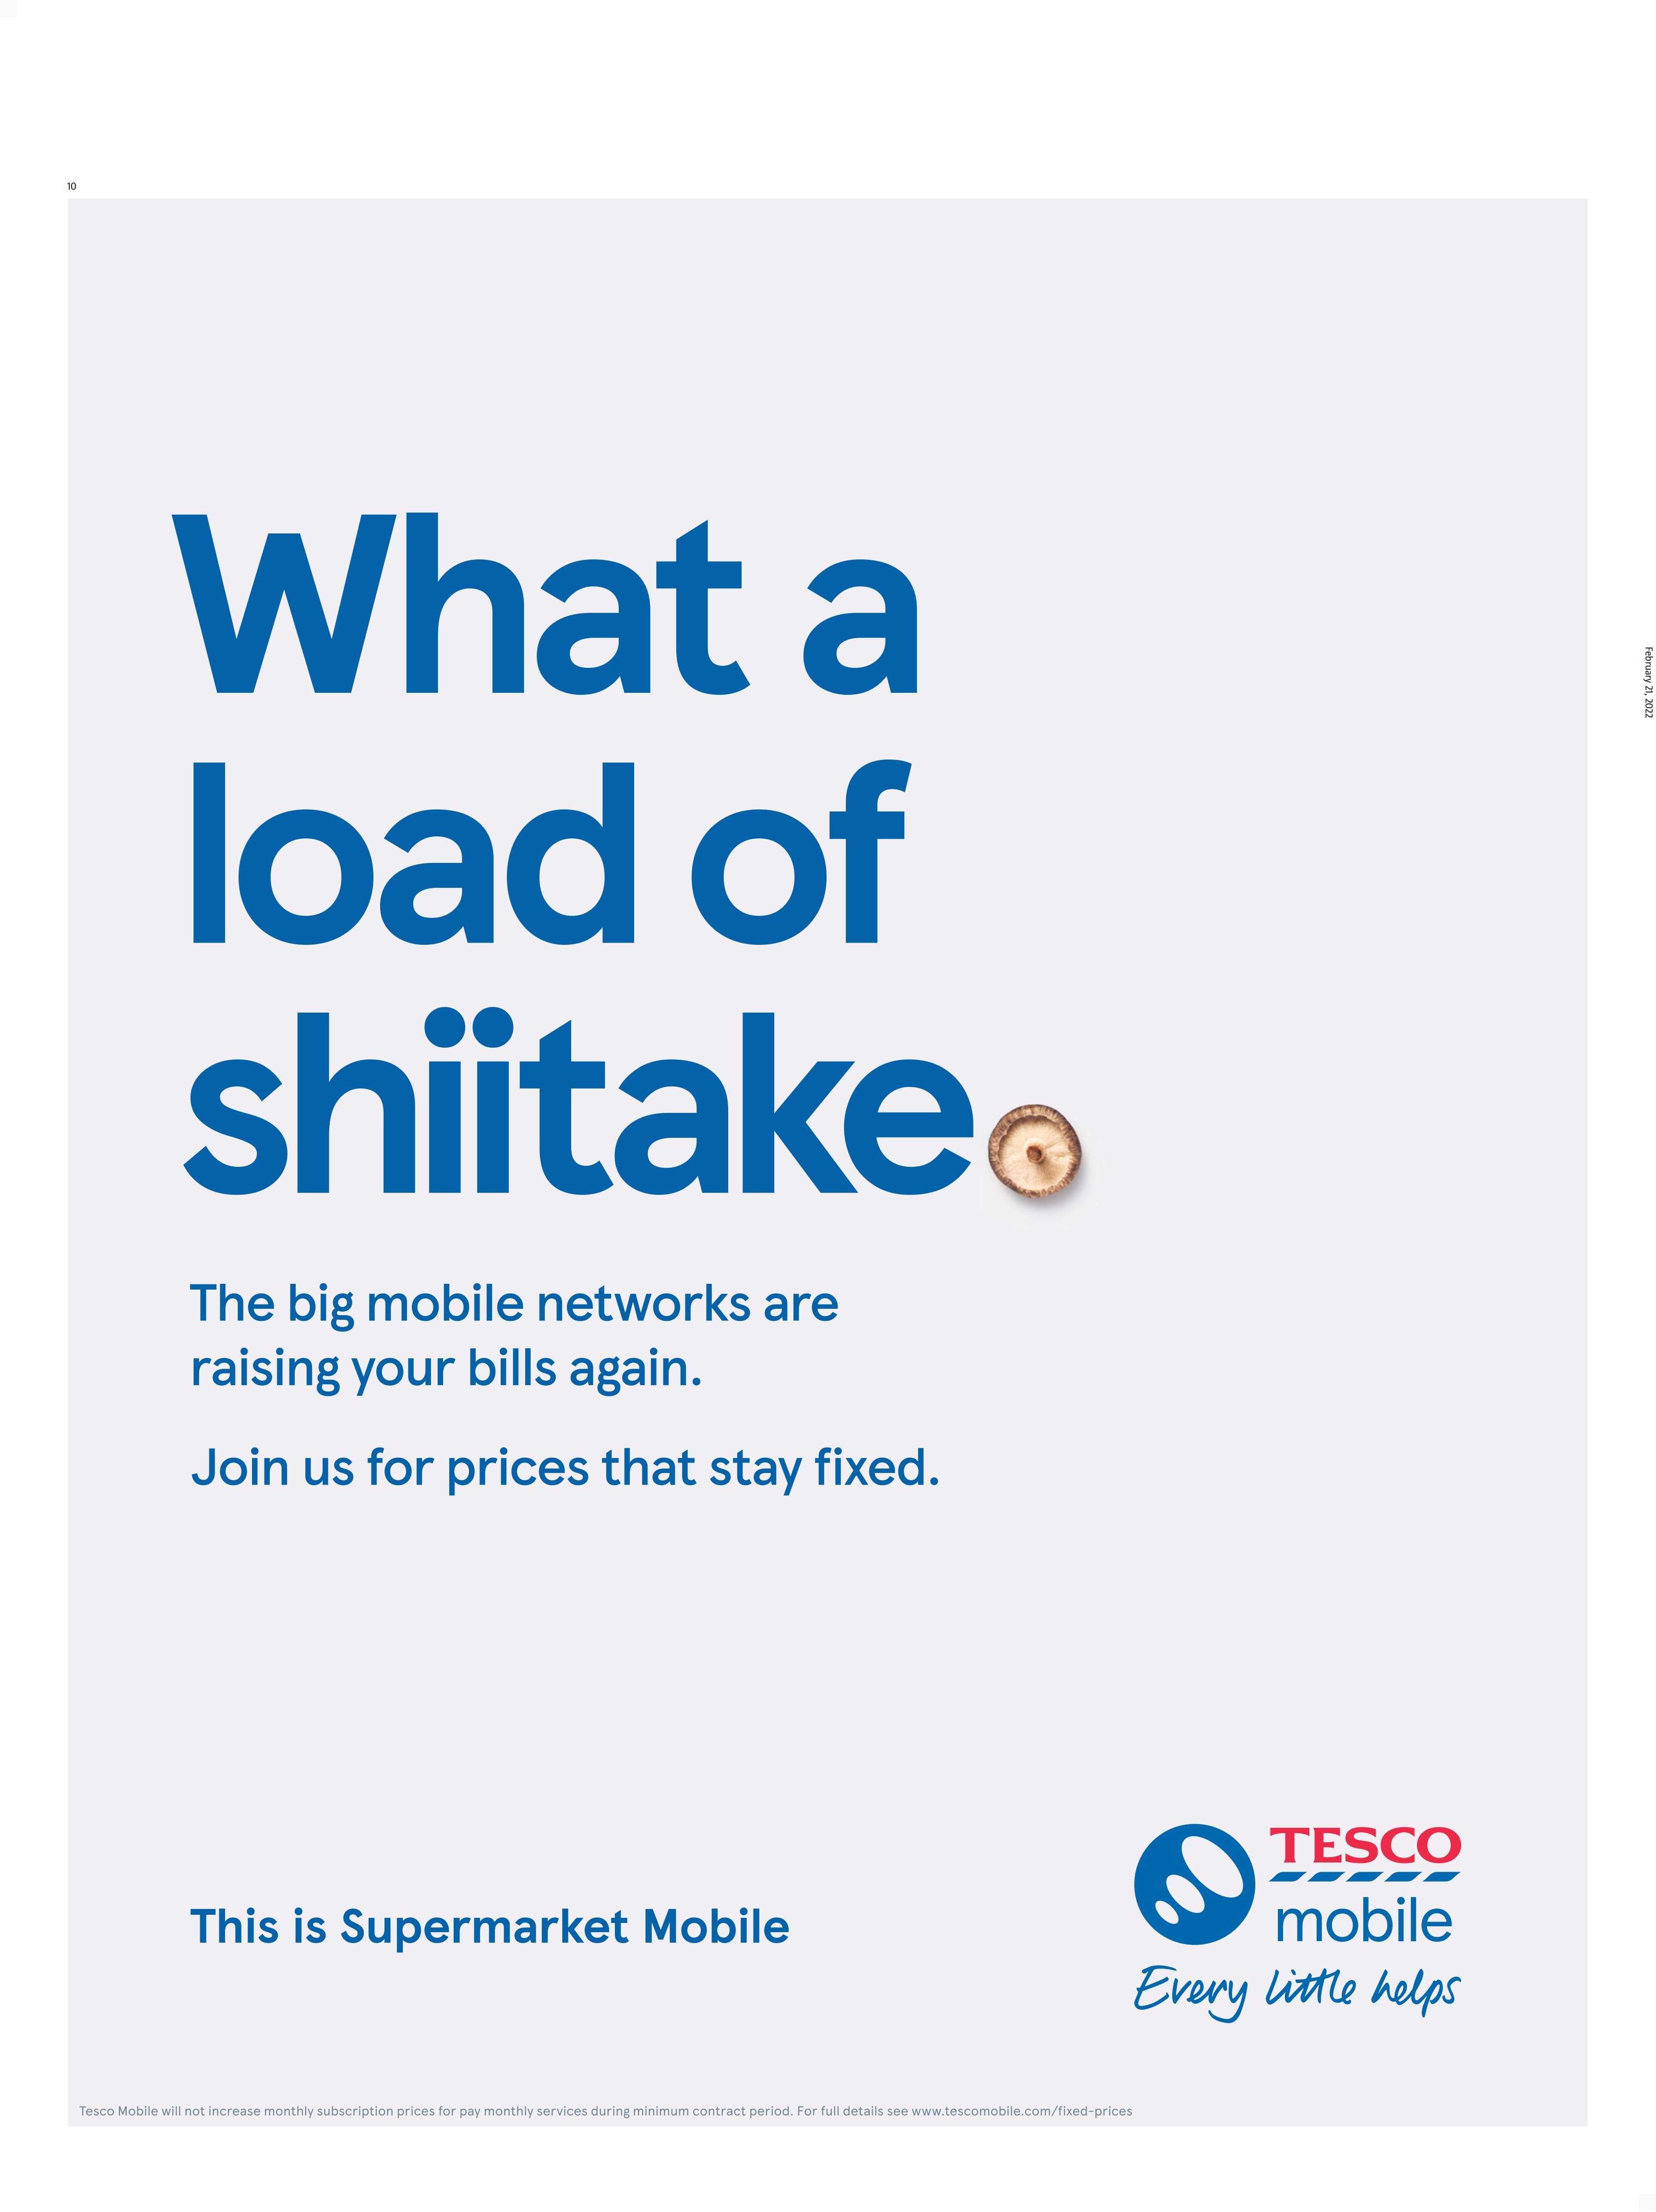 A Tesco Mobile ad banned by the ASA. (ASA/PA)